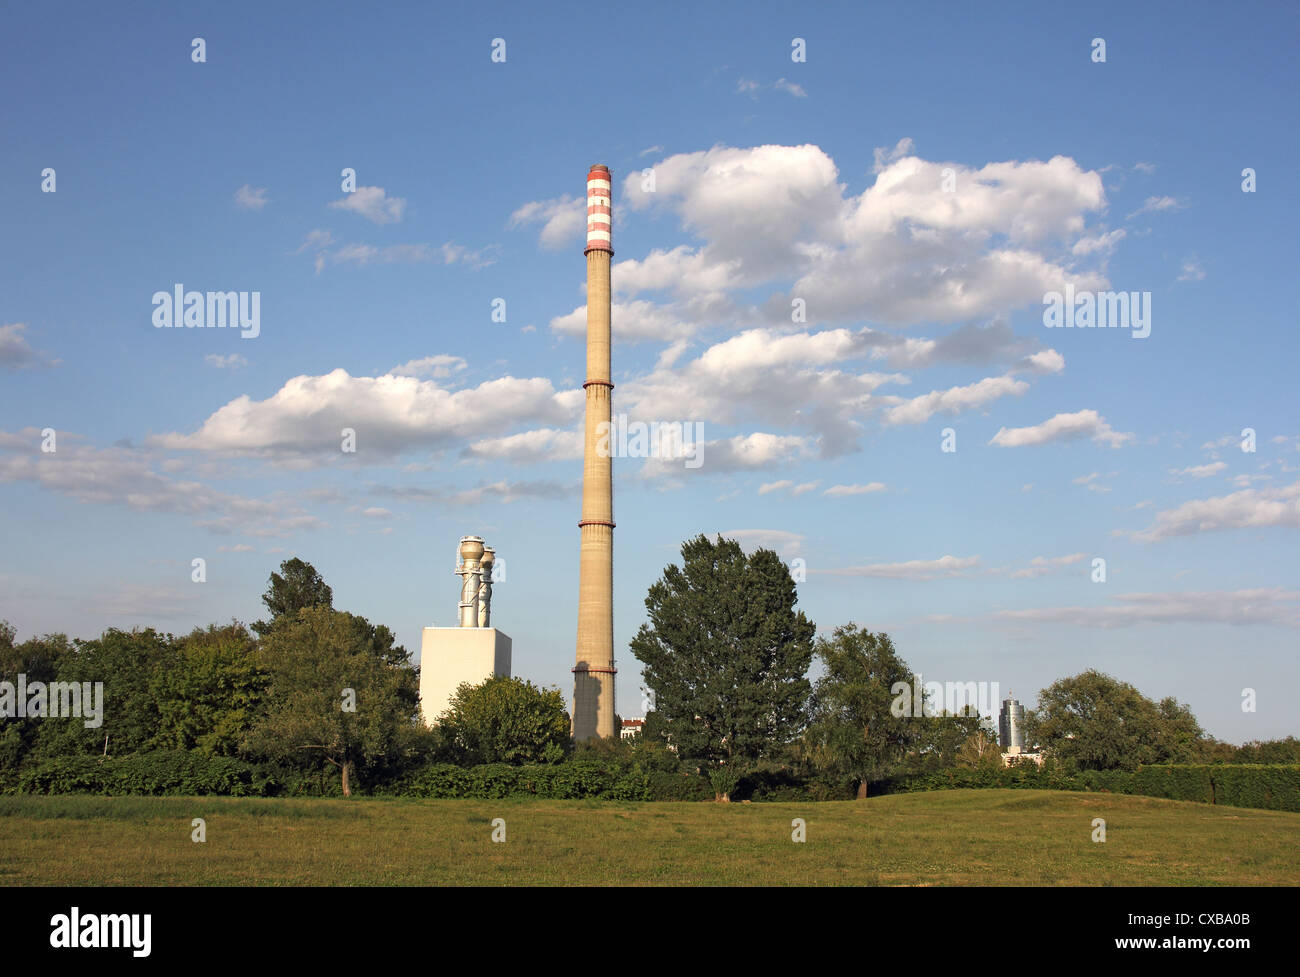 An industrial power plant with tall smoke stacks Stock Photo